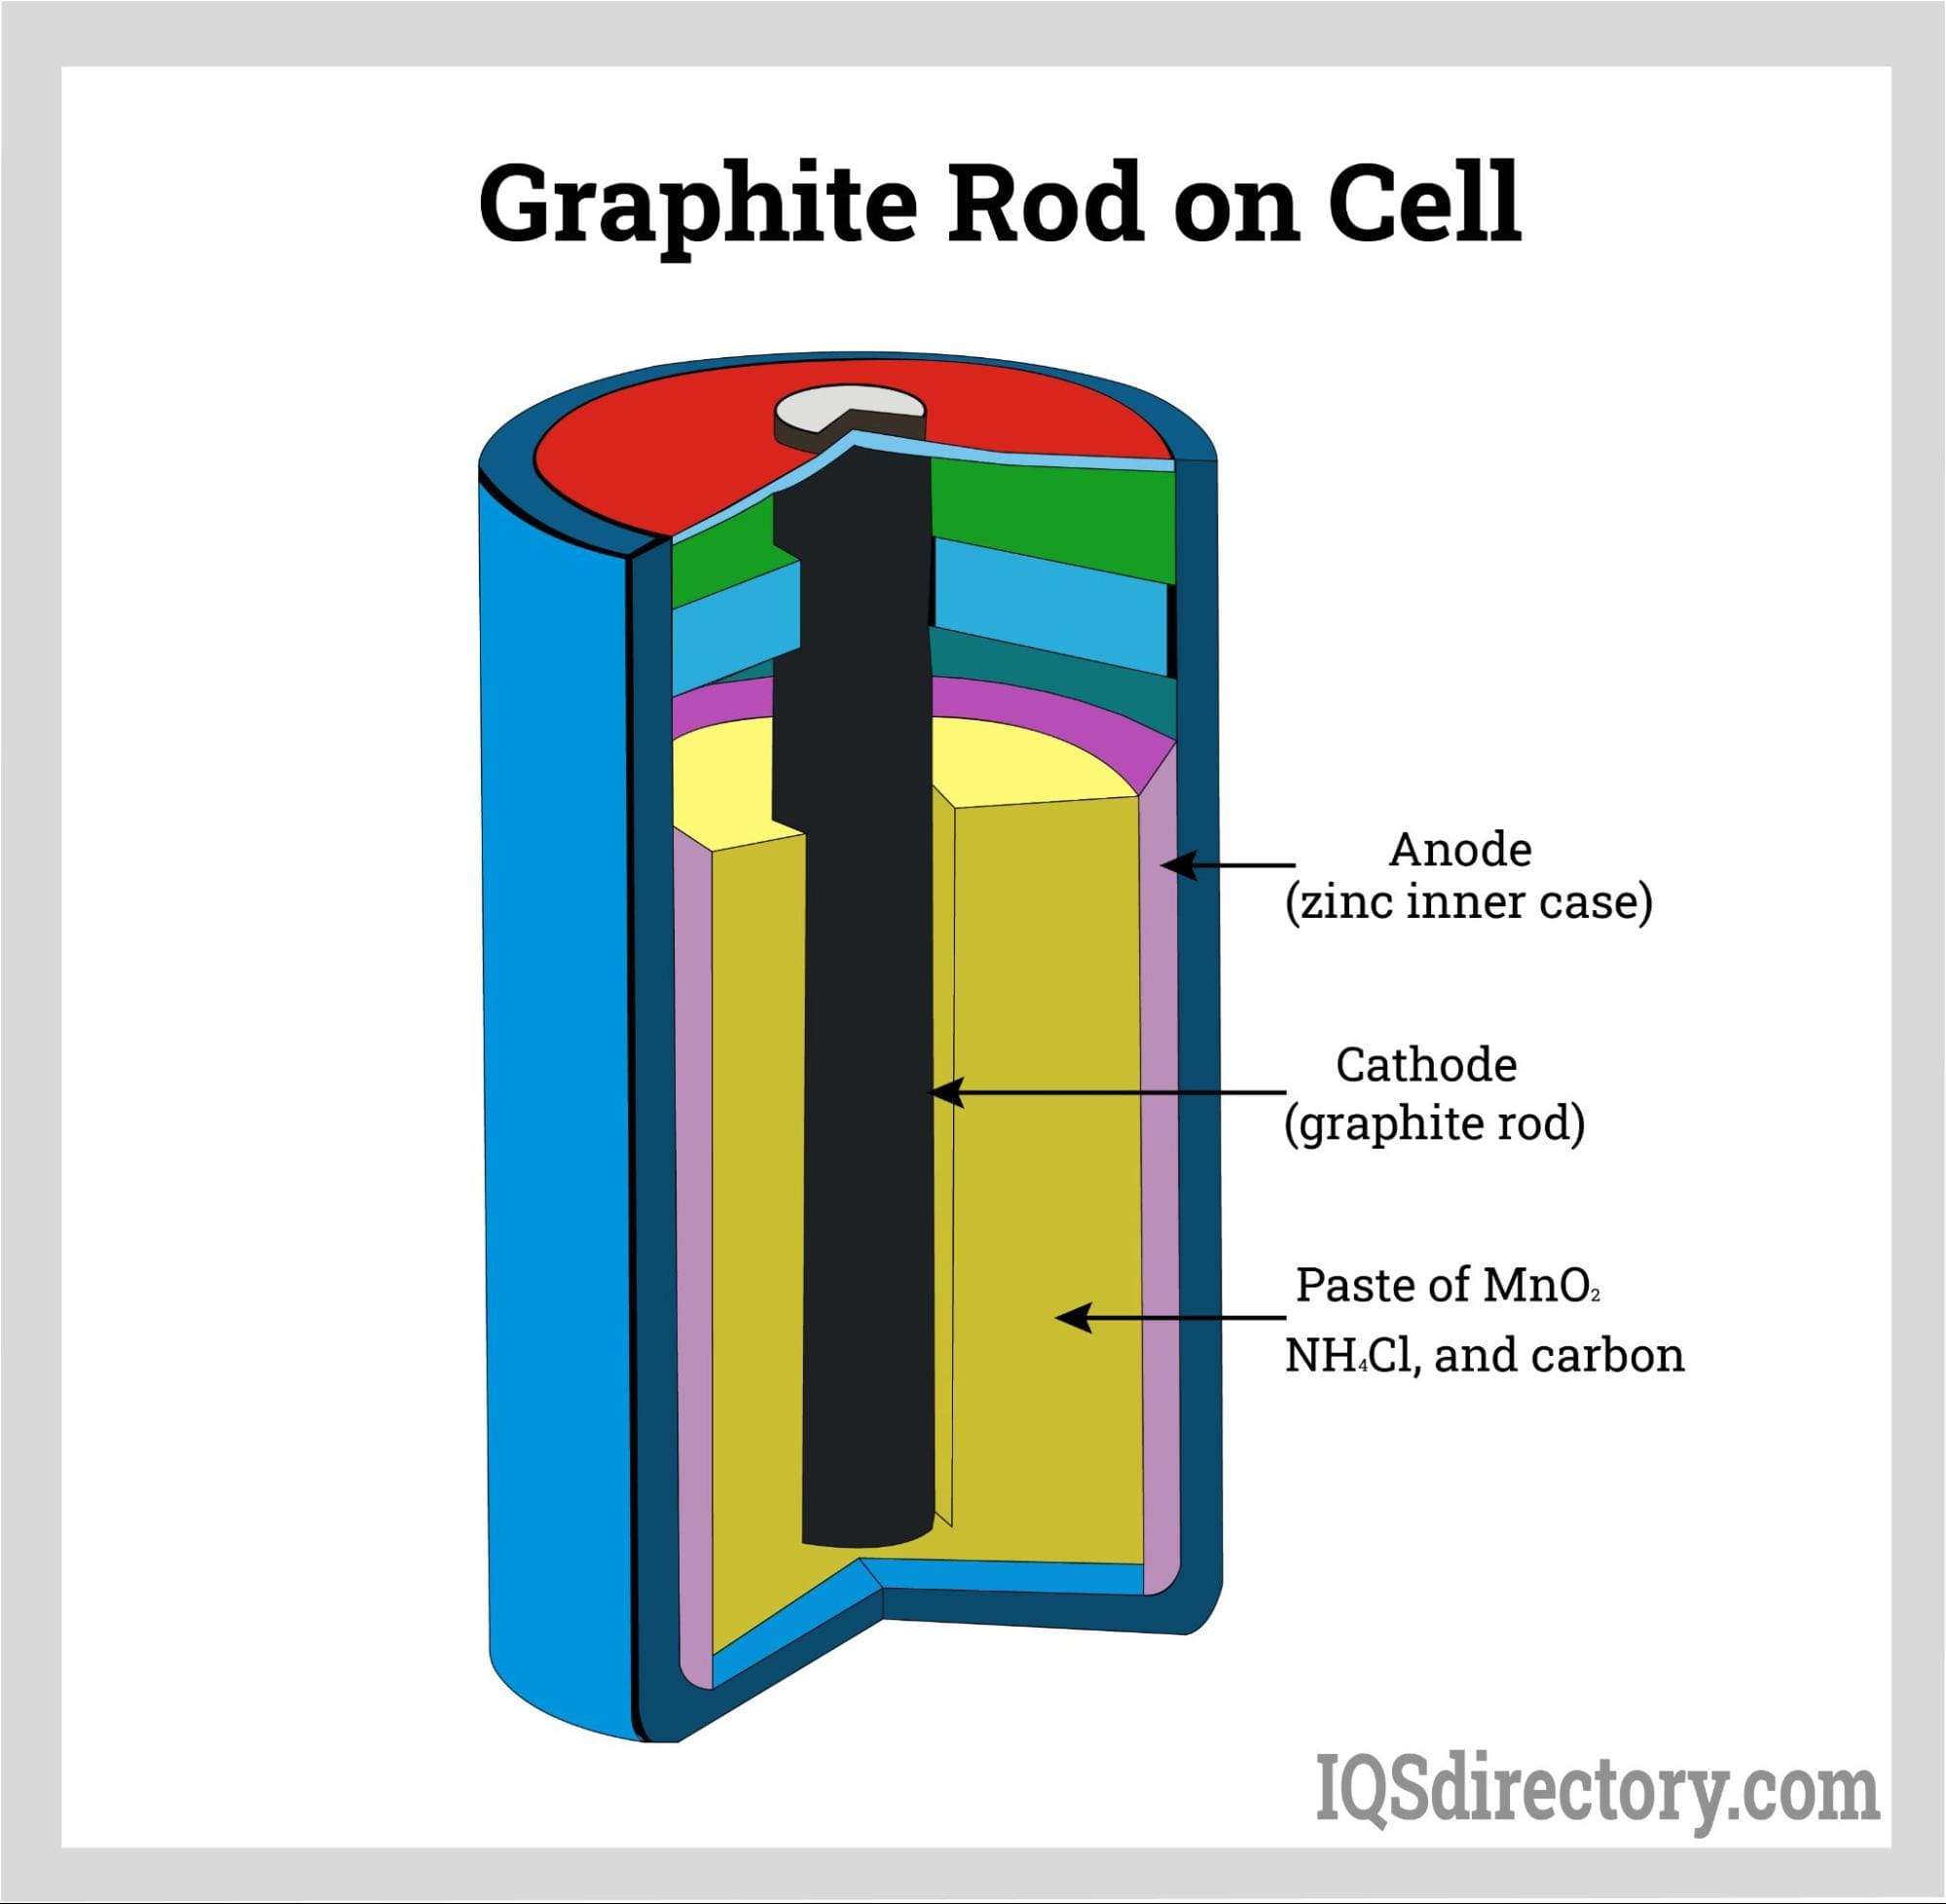 Graphite Rod on Cell